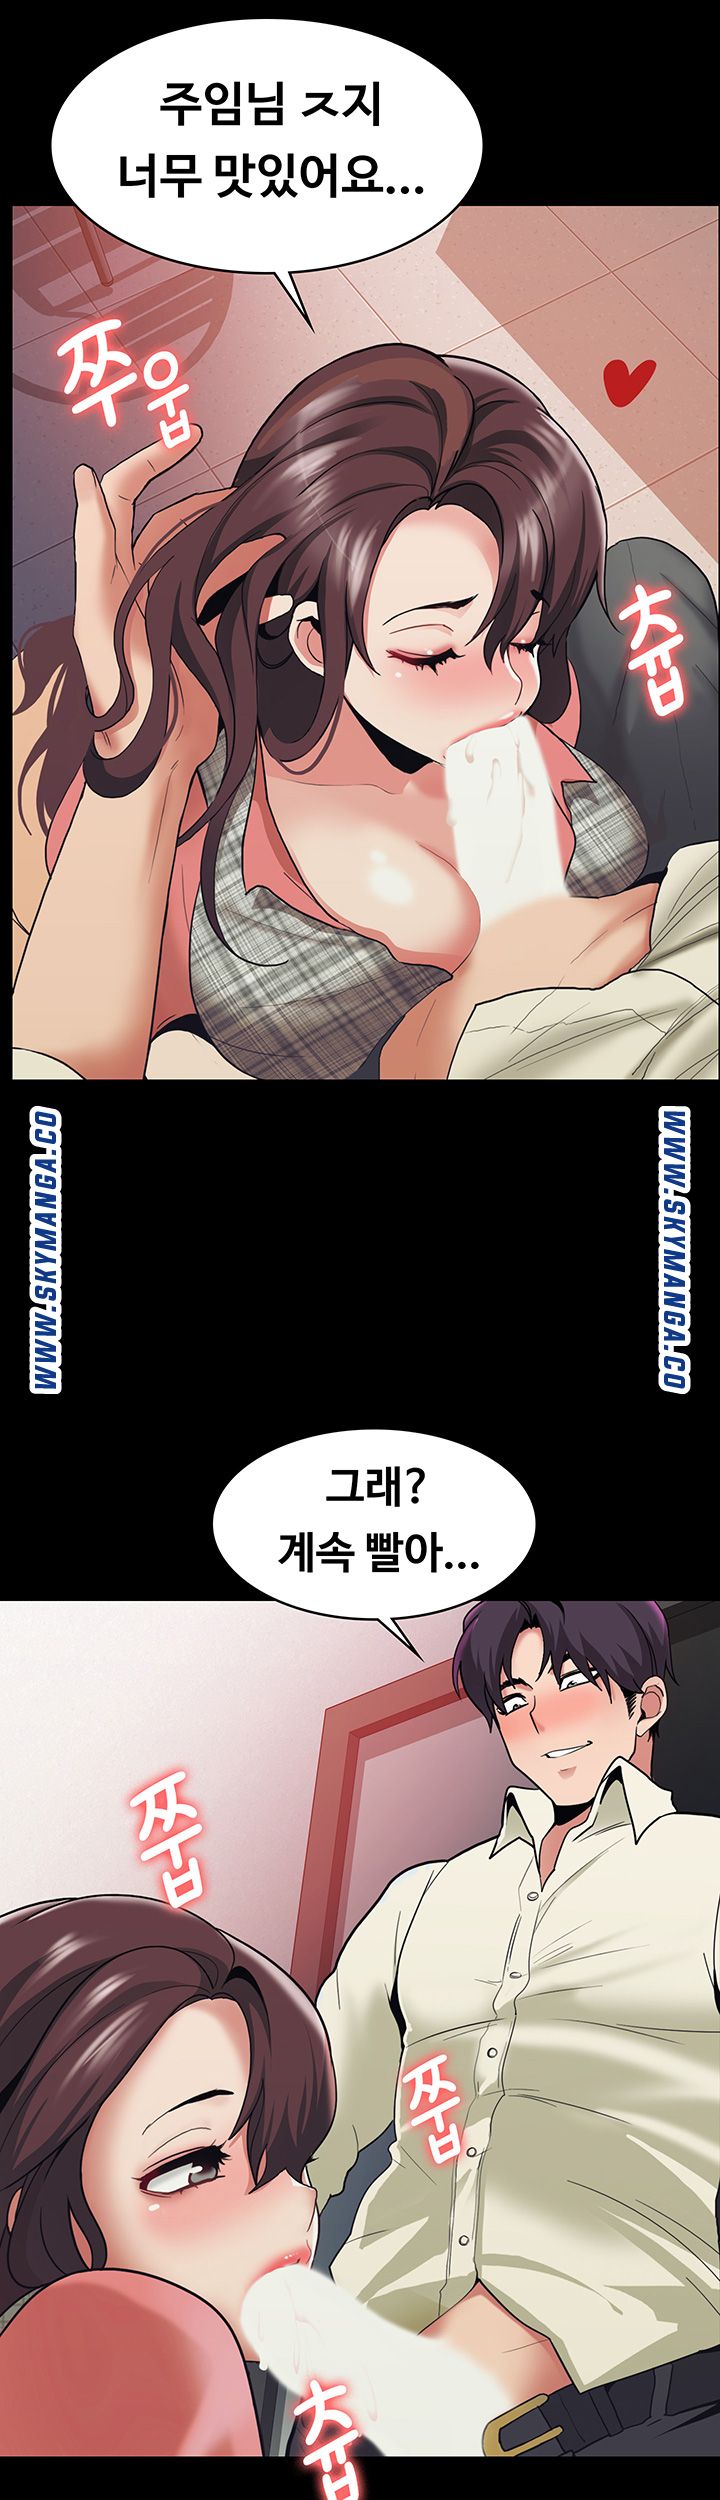 Wanna Service (Do You Want a Service?) Raw - Chapter 1 Page 5